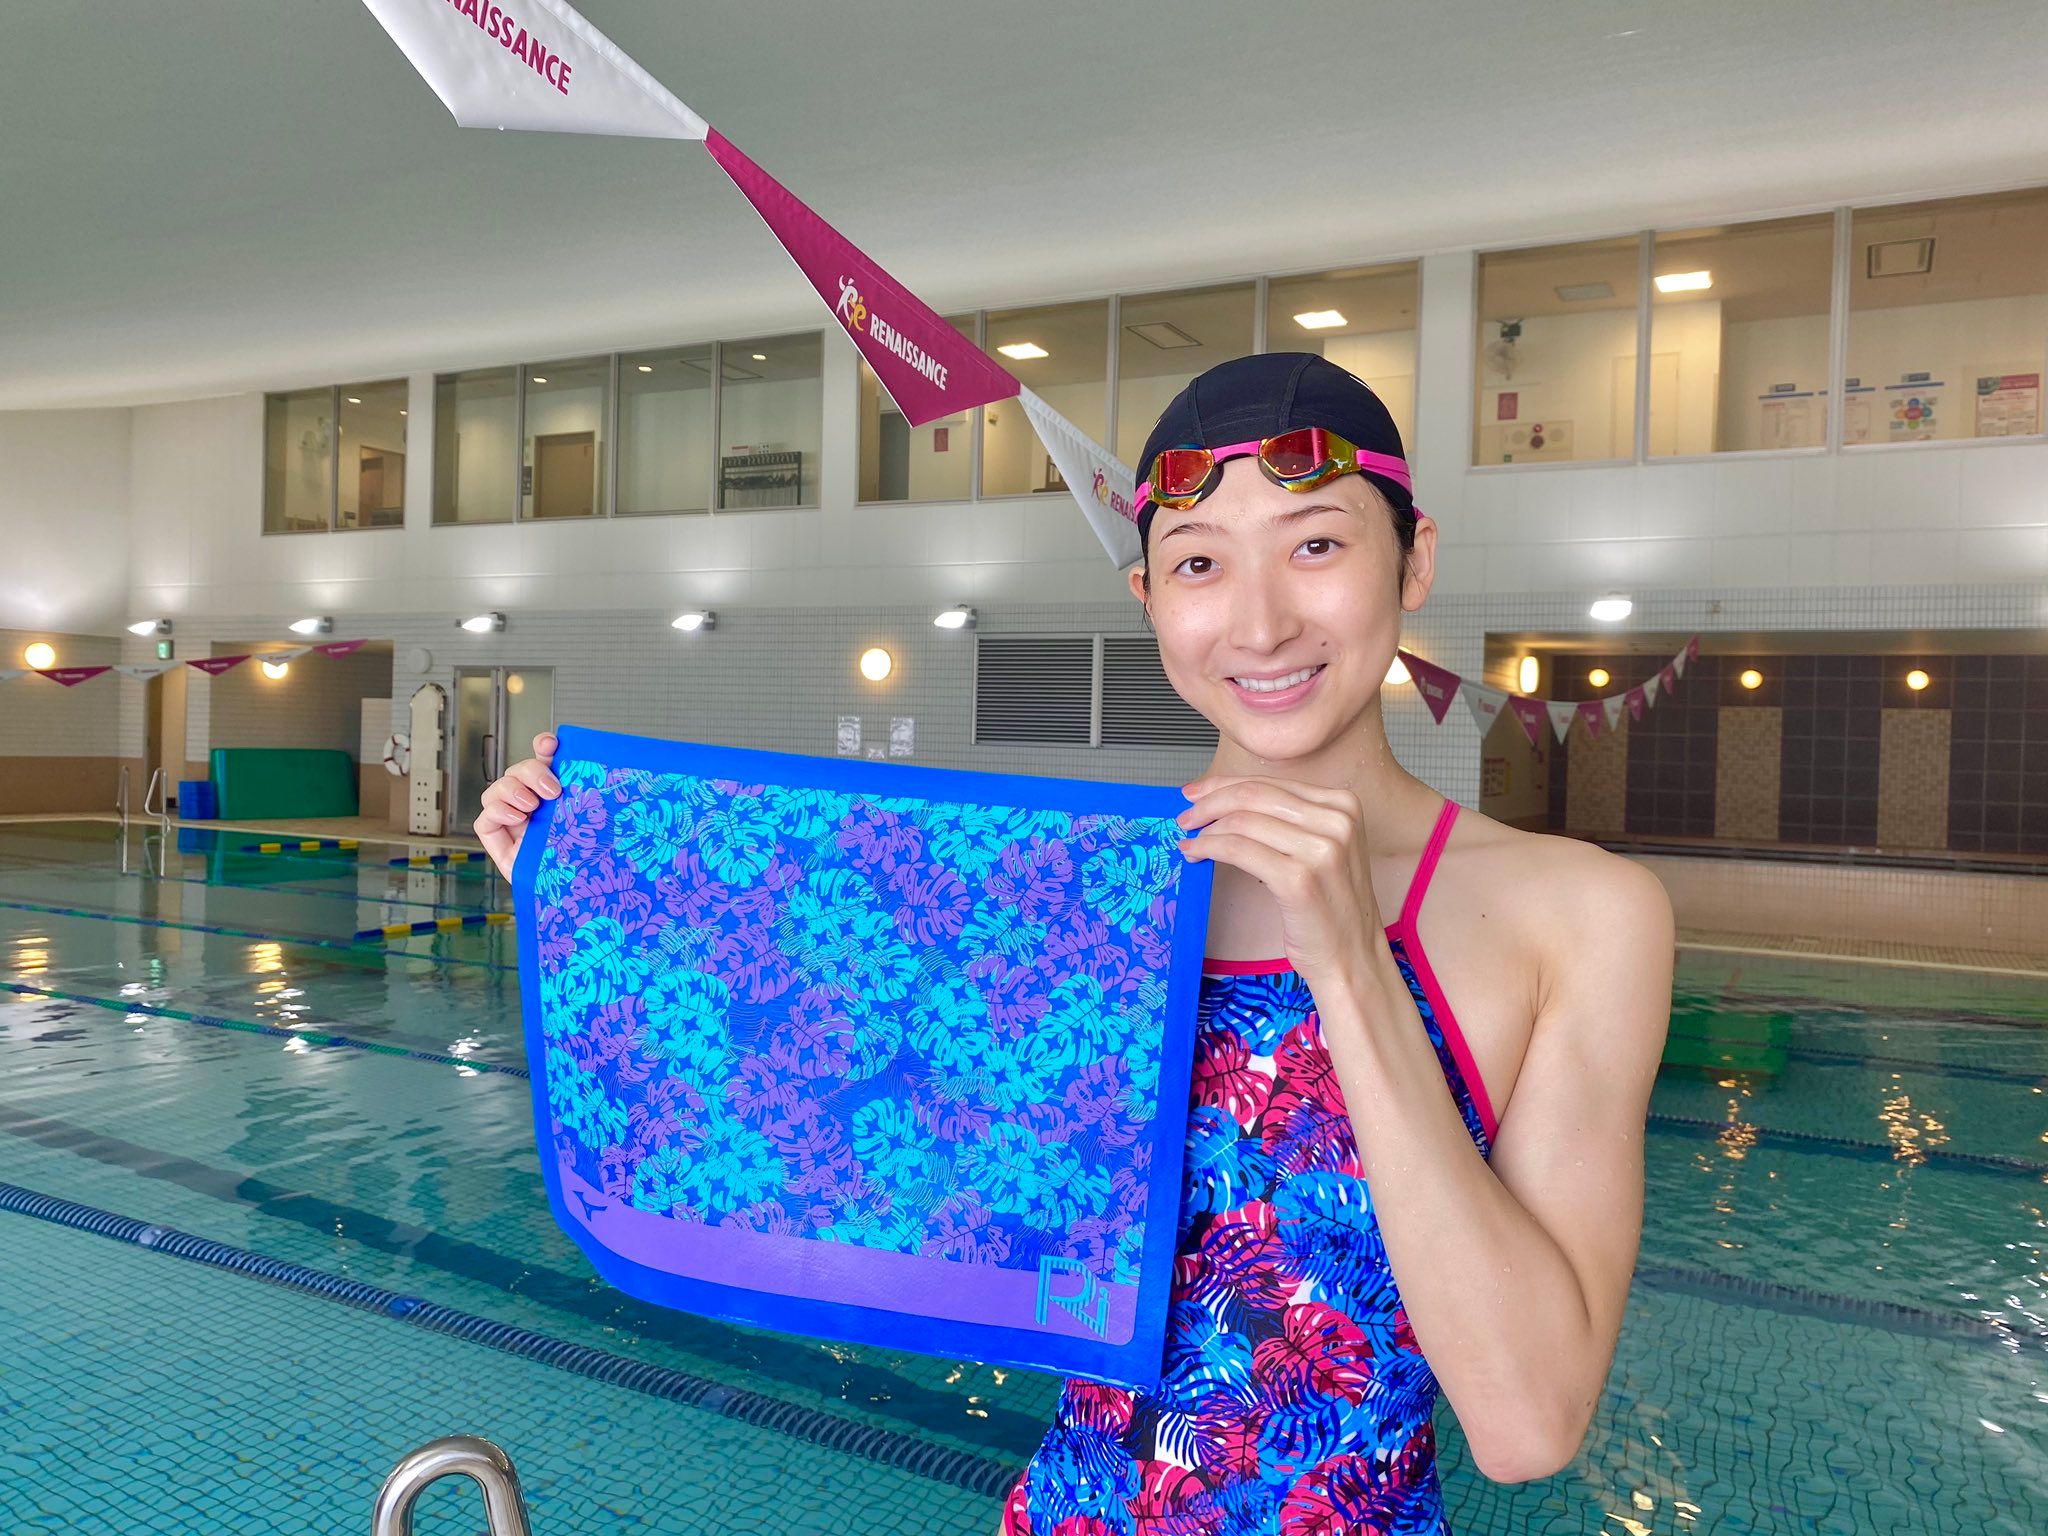 Japan’s Rikako Ikee, returning from leukemia, to swim in four events at Olympic qualifier